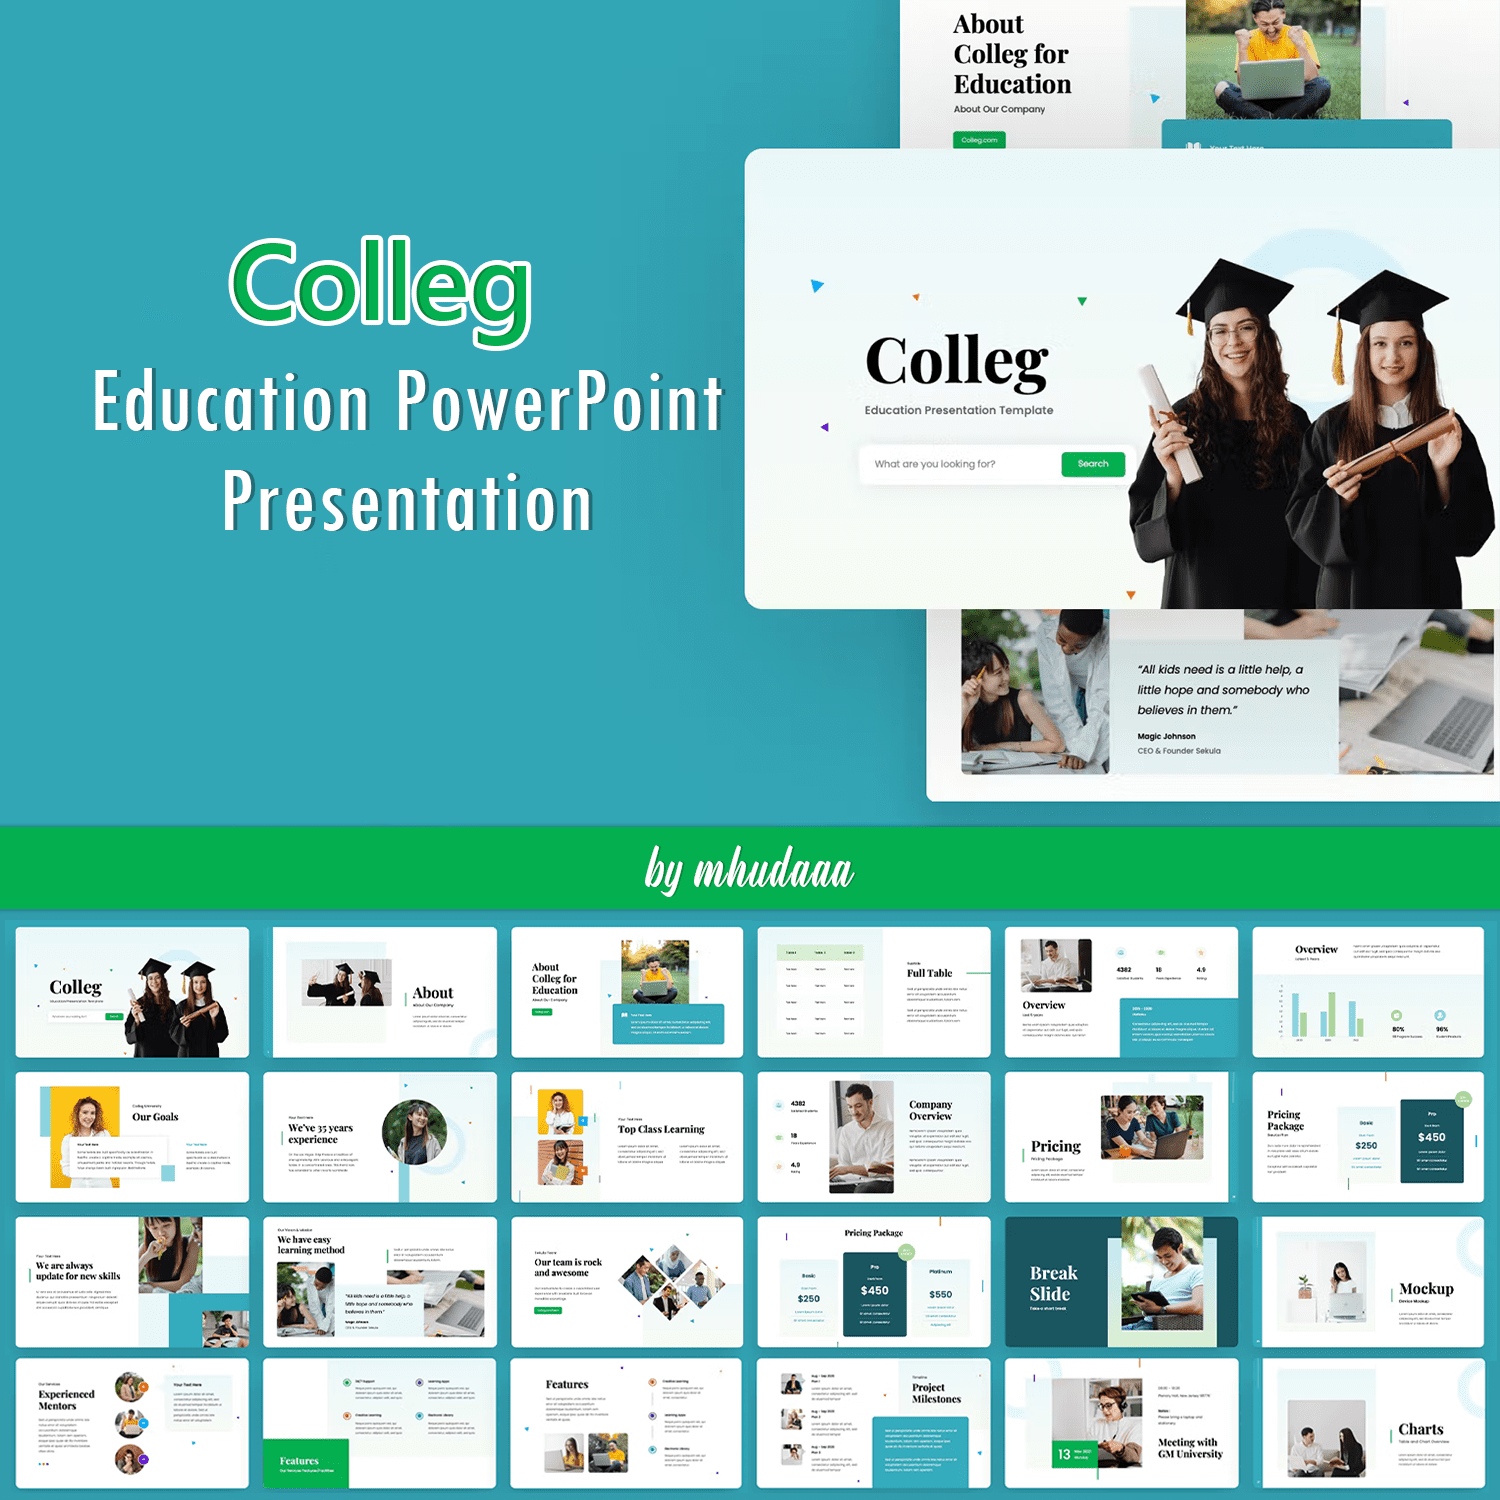 Colleg – Education PowerPoint Presentation Template created by mhudaaa.